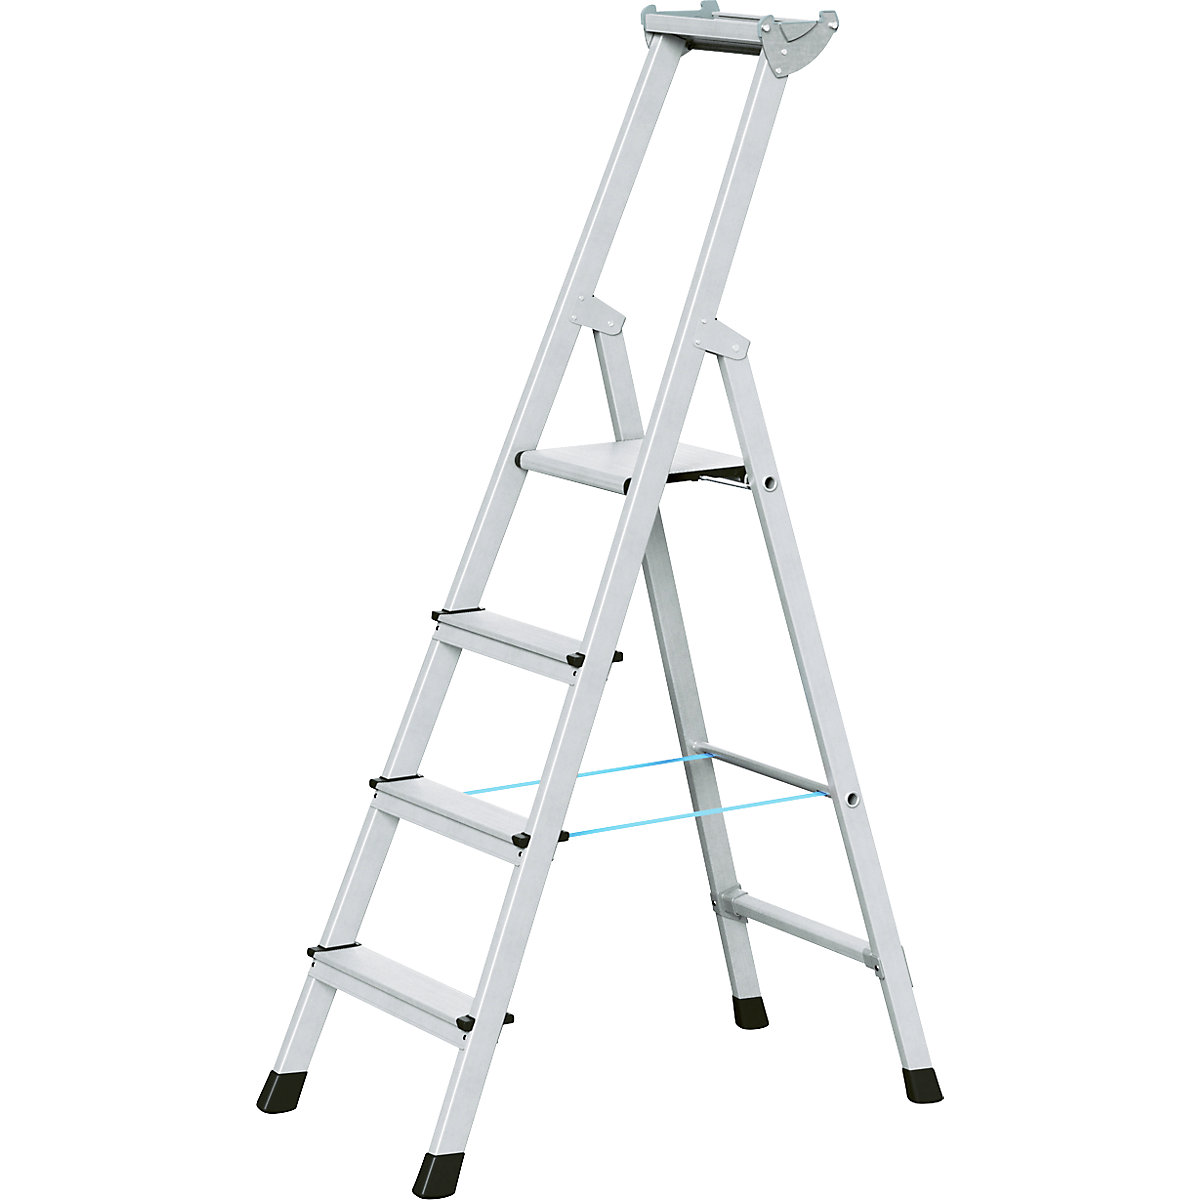 Professional step ladder, single sided access - ZARGES